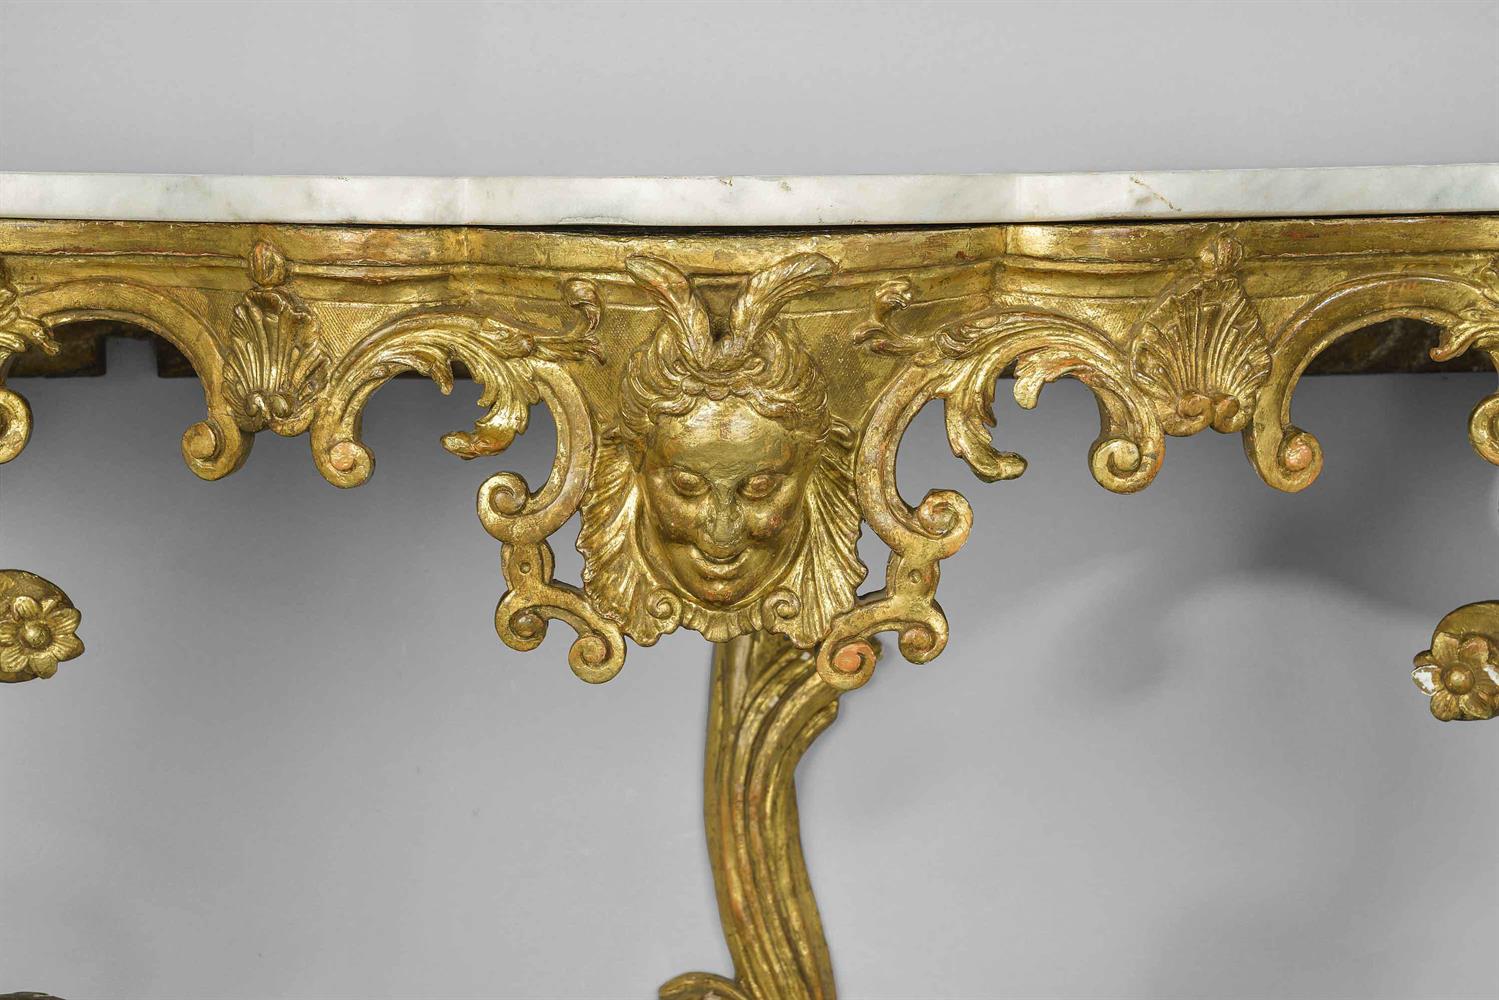 AN ITALIAN CARVED GILTWOOD SERPENTINE CONSOLE TABLE, 18TH CENTURY - Image 3 of 6